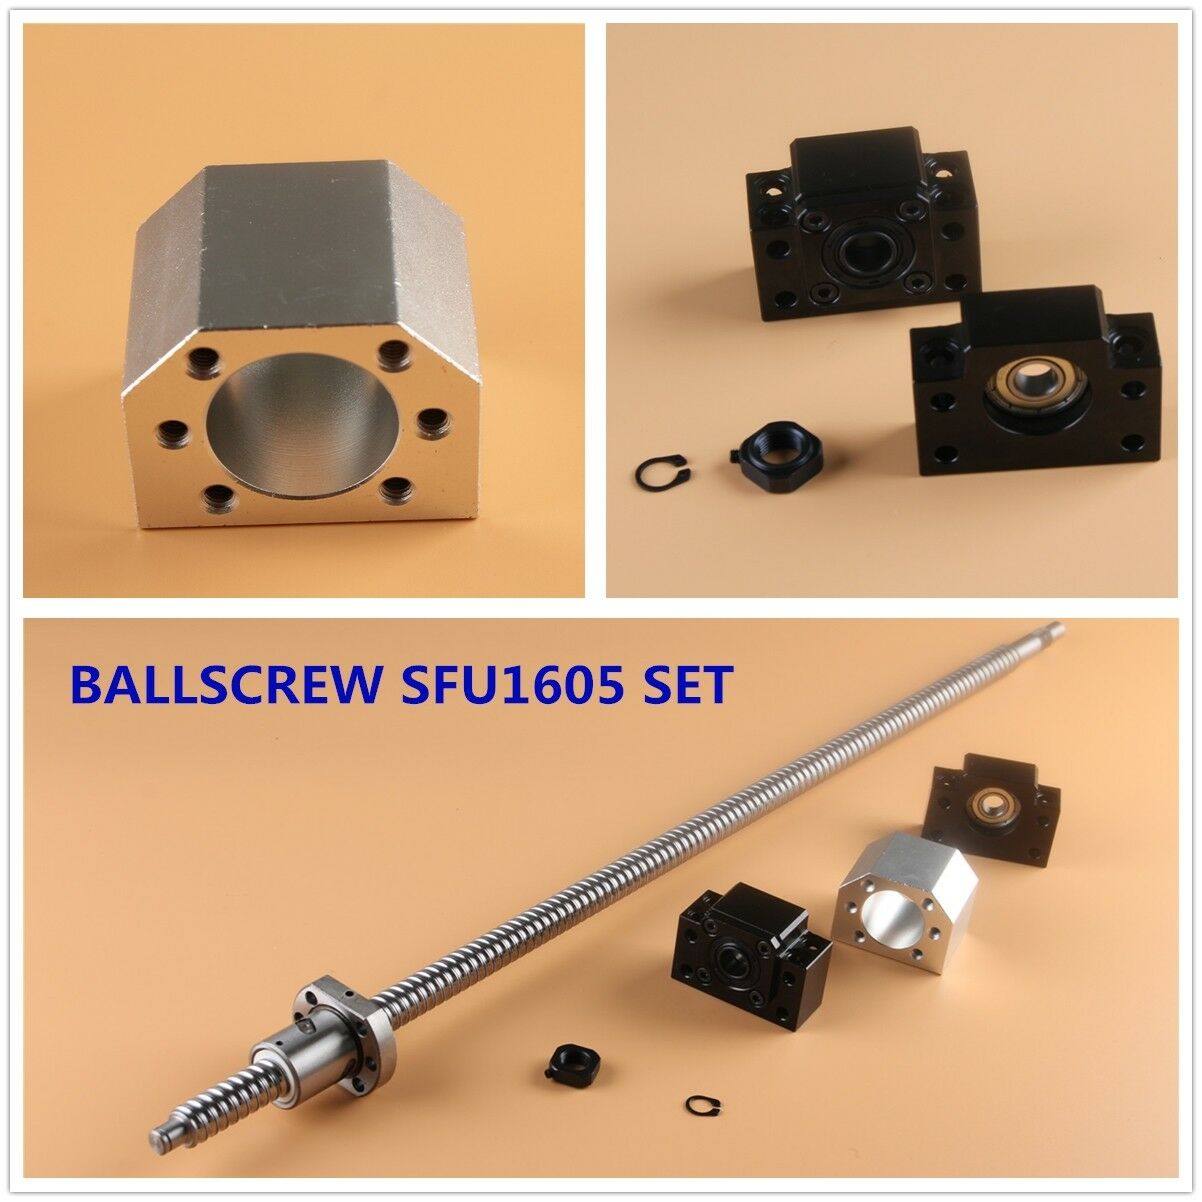 Cnc Ball Screw Set Sfu1605 With Nut L250-2000mm & Bk/bf12 Support & Nut Housing